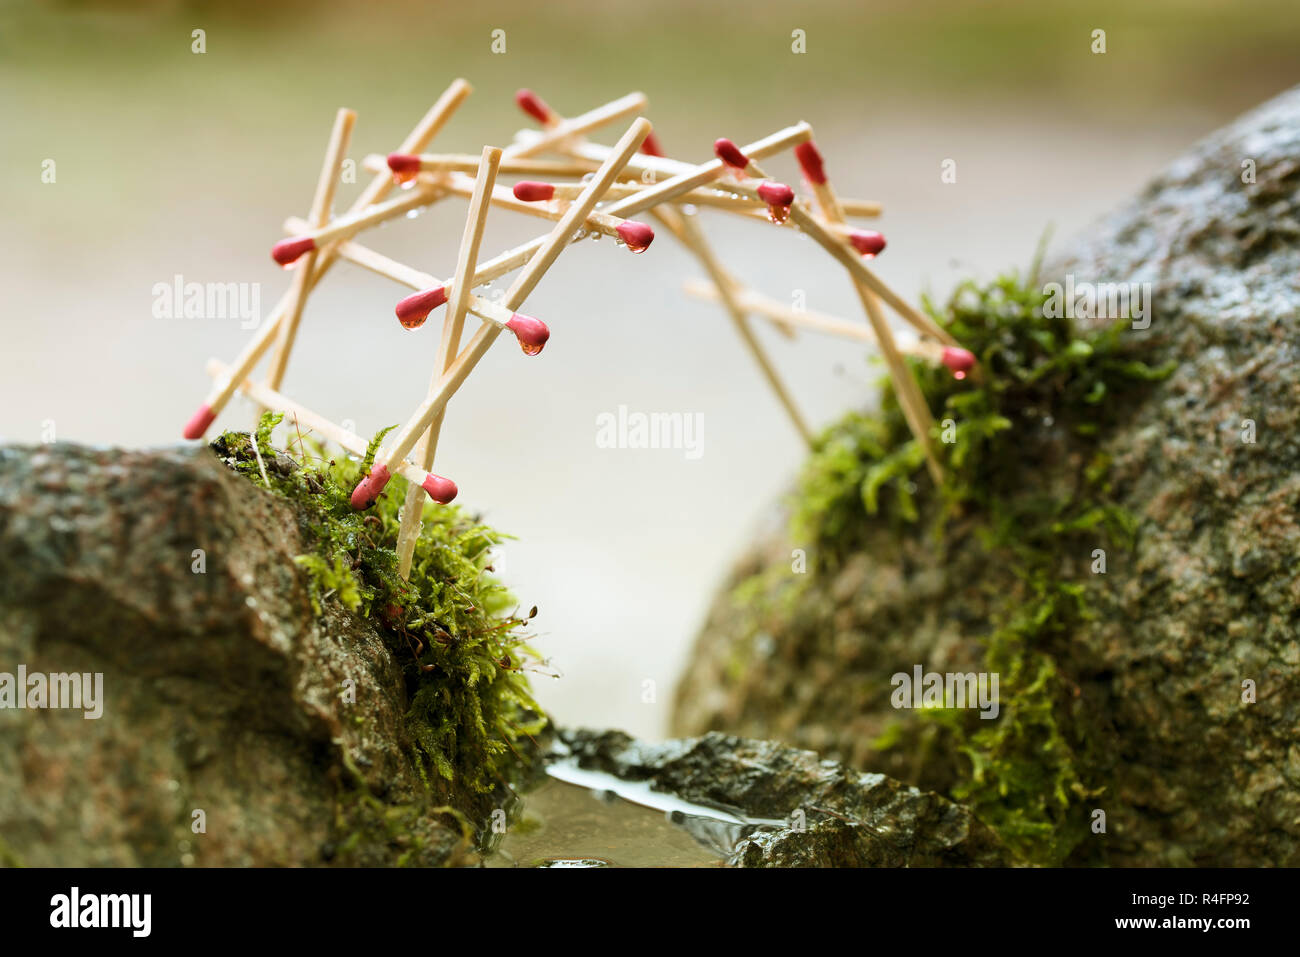 self-supporting bridge by leonardo da vinci built from matches over mossy rocks, selected focus, narrow depth of field Stock Photo